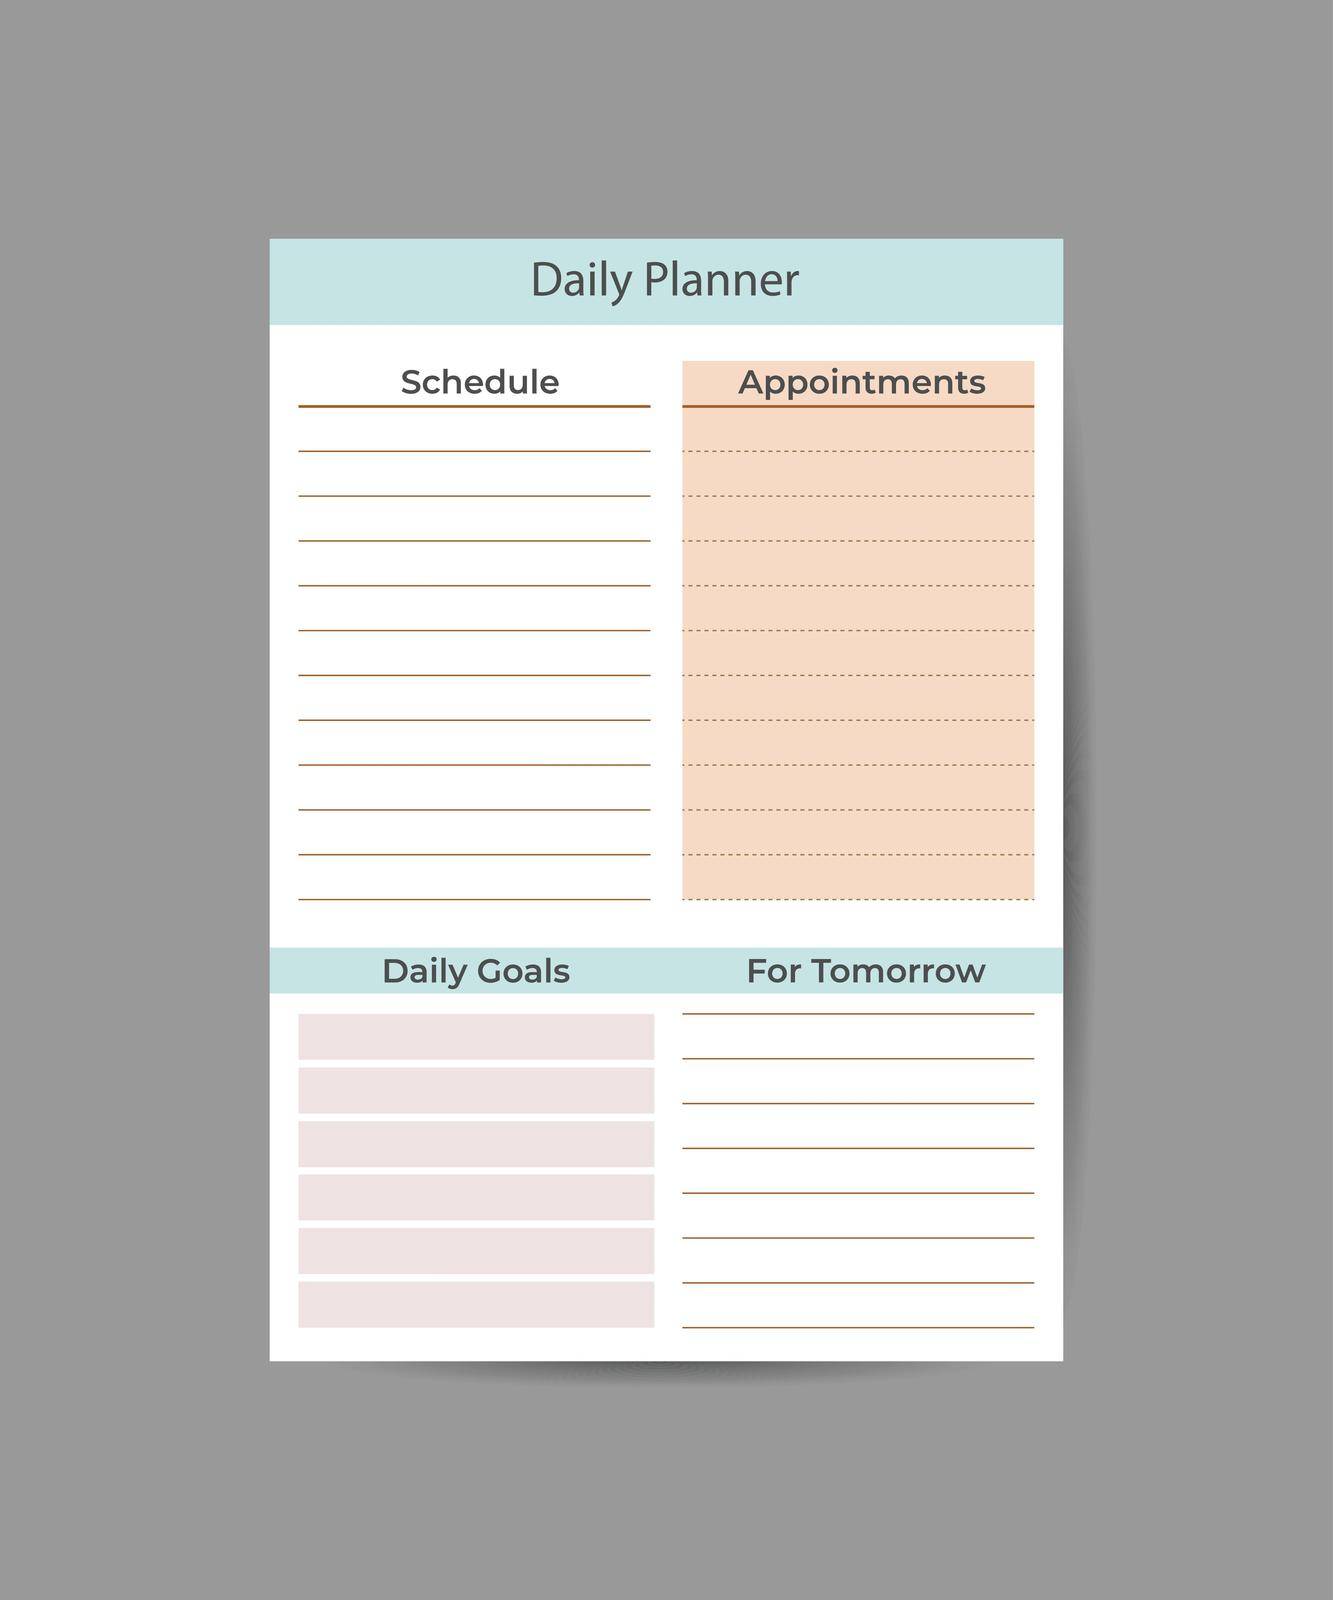 Daily Planner Template Organizer and Schedule for Notes Goals and To Do List Template design vector by ANITA